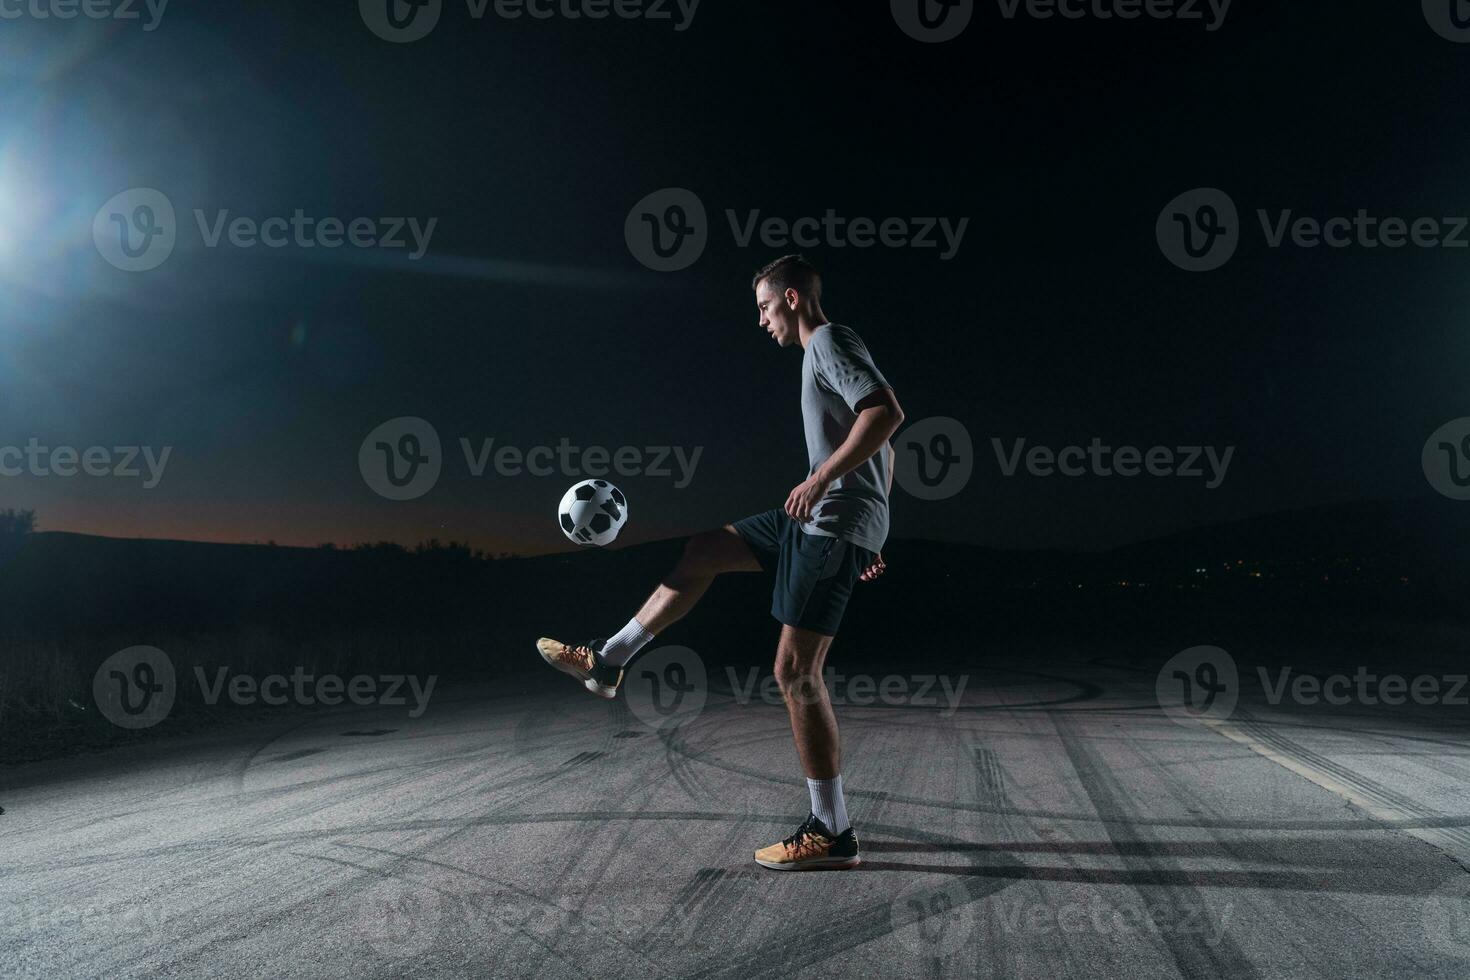 portrait of a young handsome soccer player man on a street playing with a football ball. photo